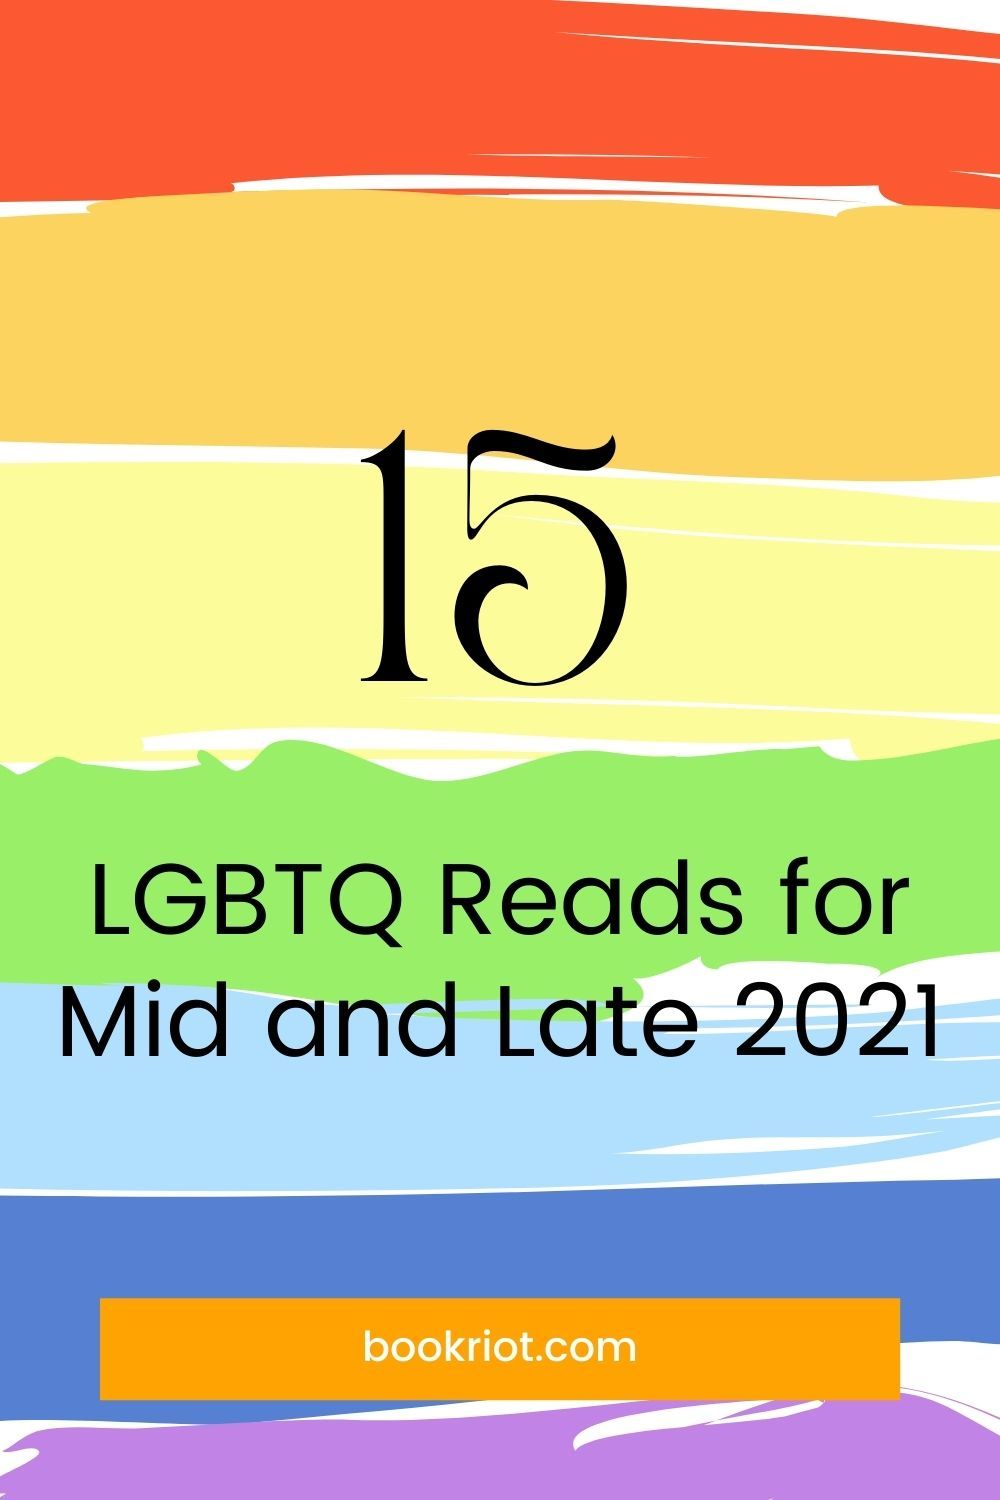 15 LGBTQ Reads for Mid and Late 2021